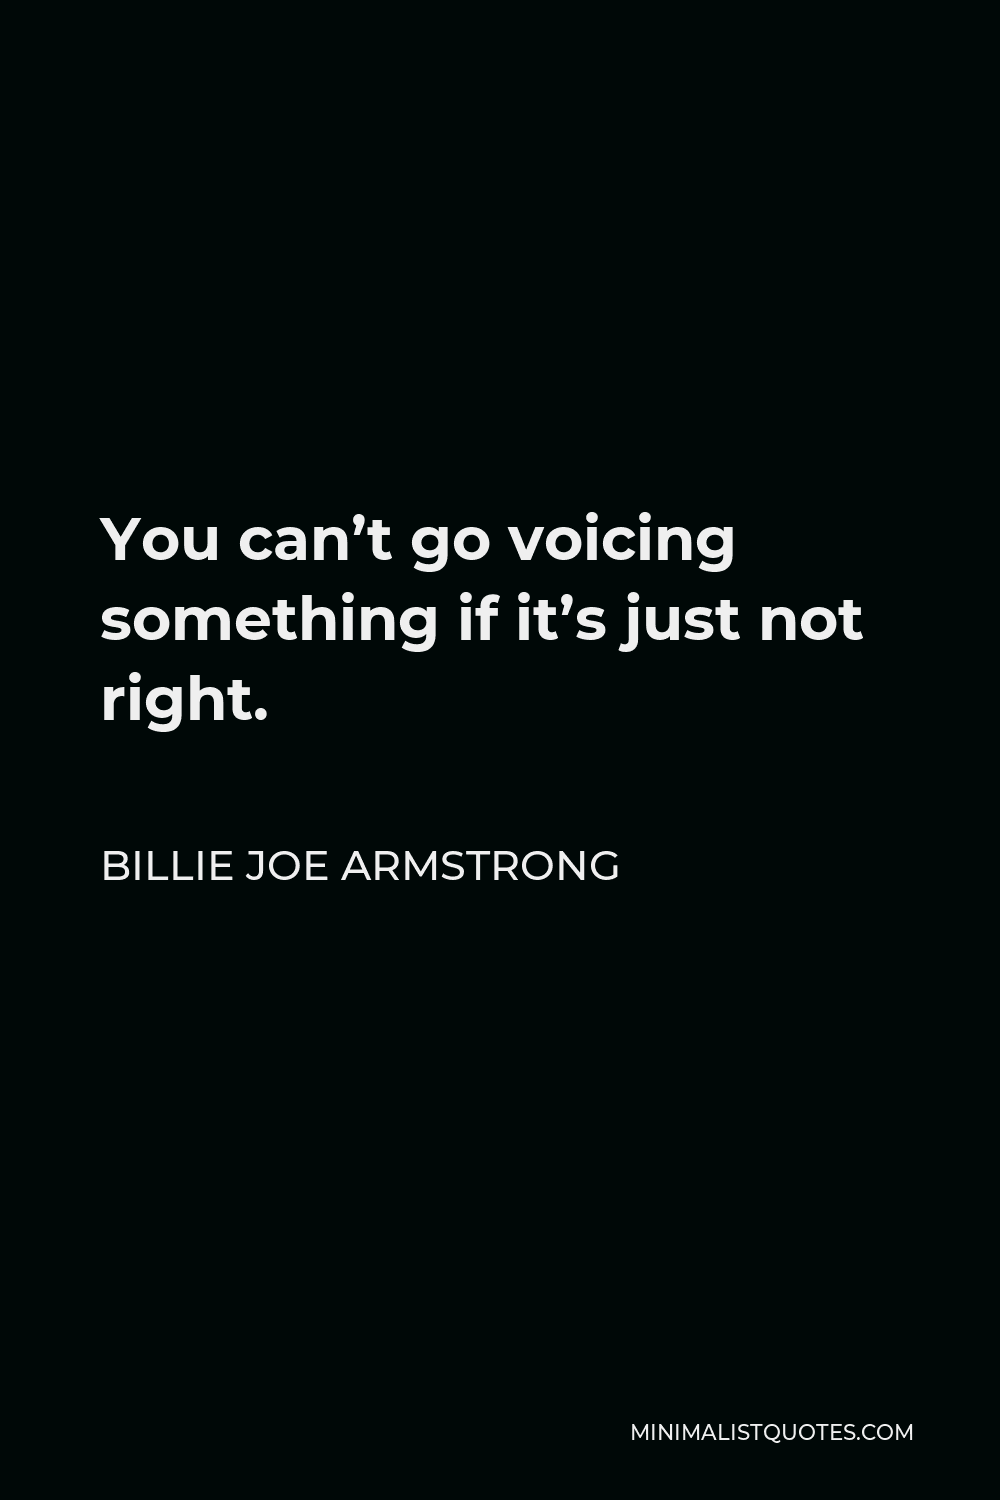 Billie Joe Armstrong Quote - You can’t go voicing something if it’s just not right.